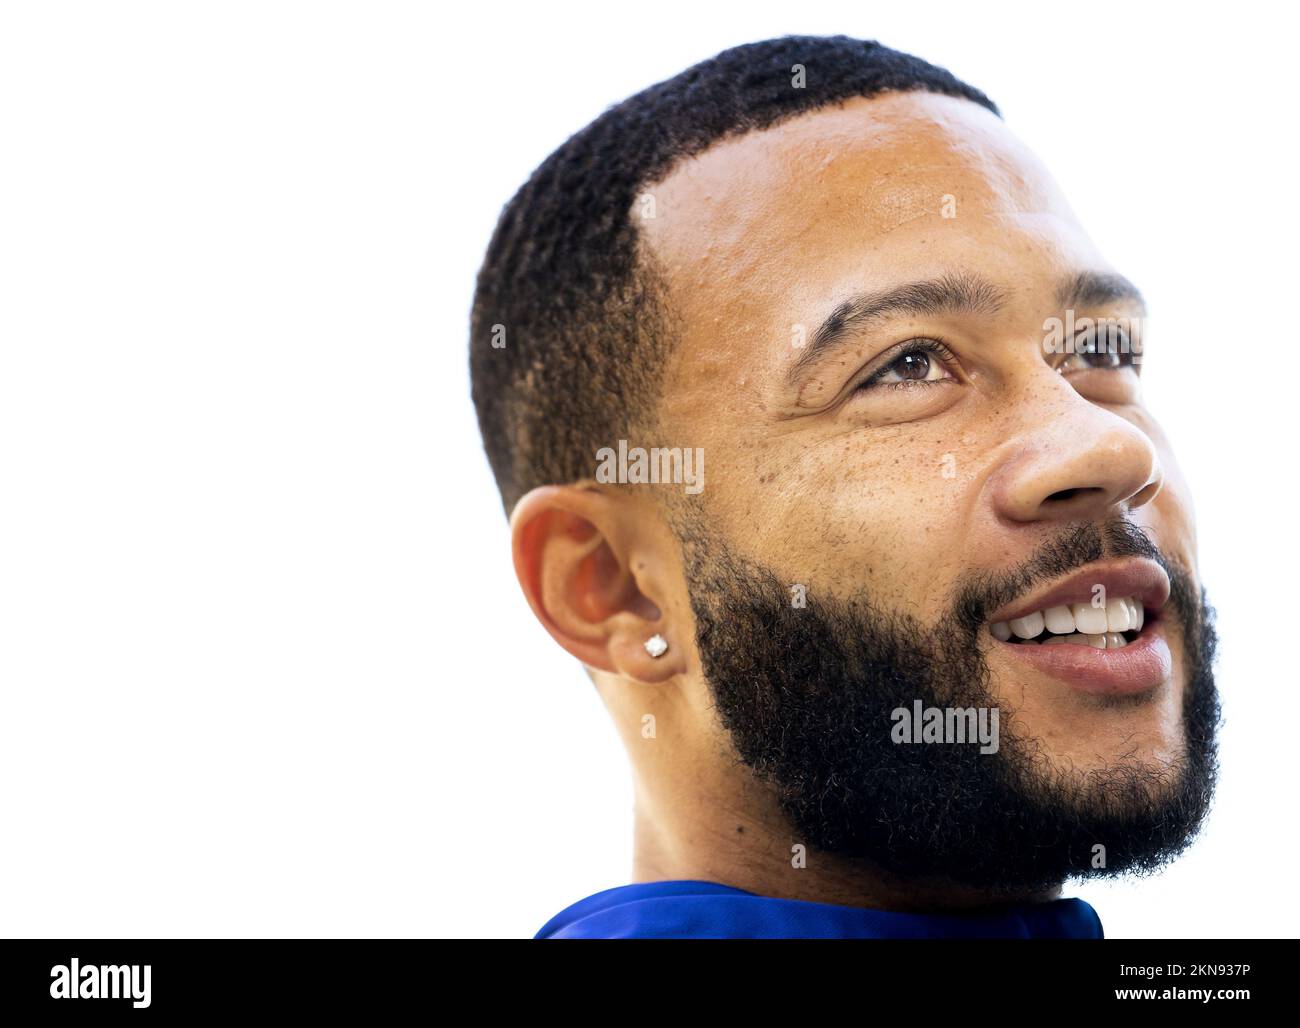 DOHA - Memphis Depay of Holland during a media meeting of the Dutch national team during the World Cup football. ANP KOEN VAN WEEL Stock Photo